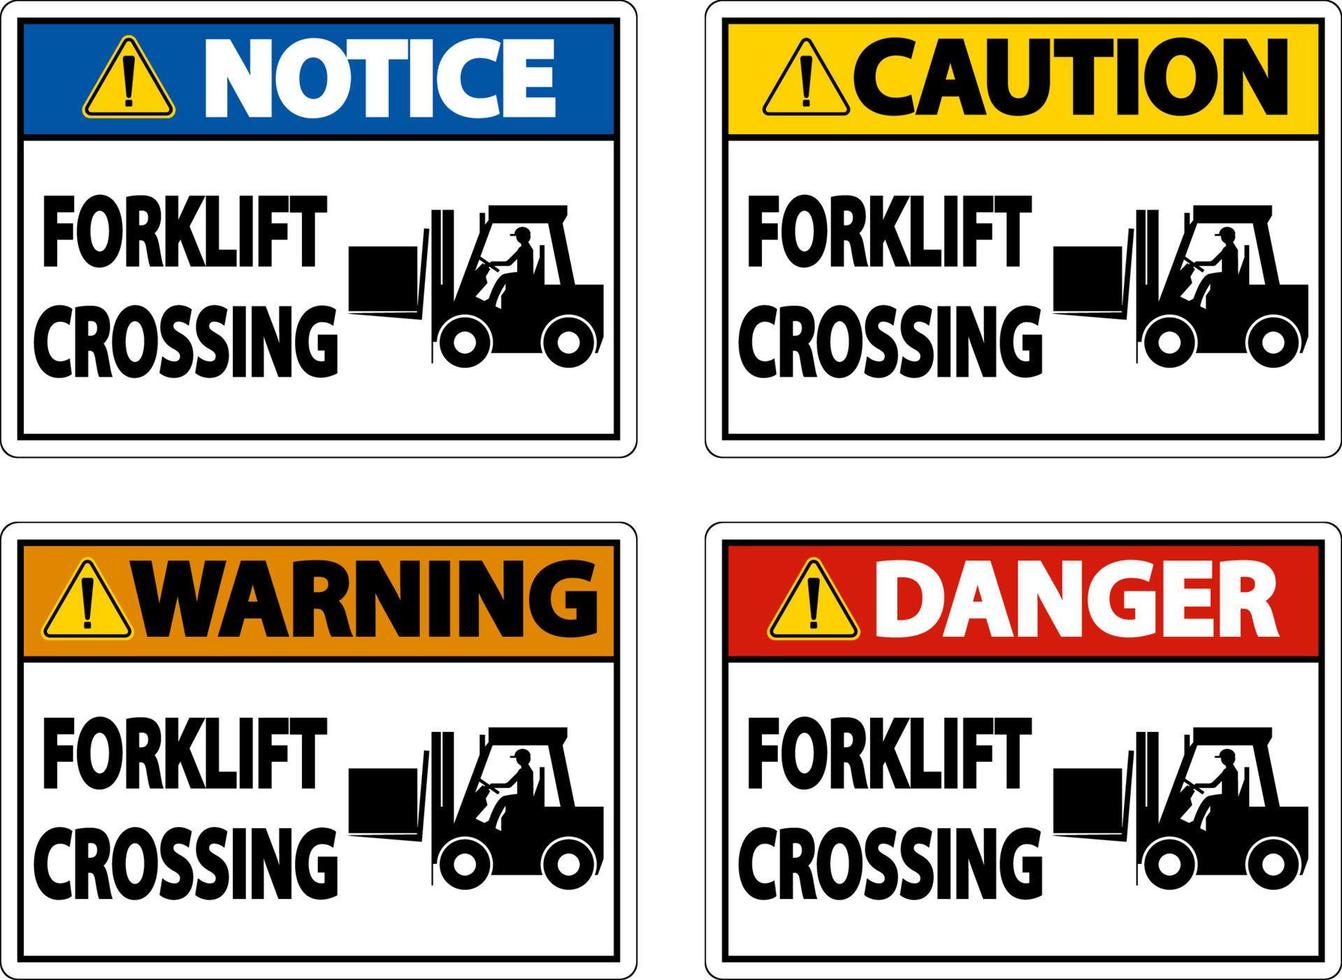 Forklift Crossing Sign On White Background vector